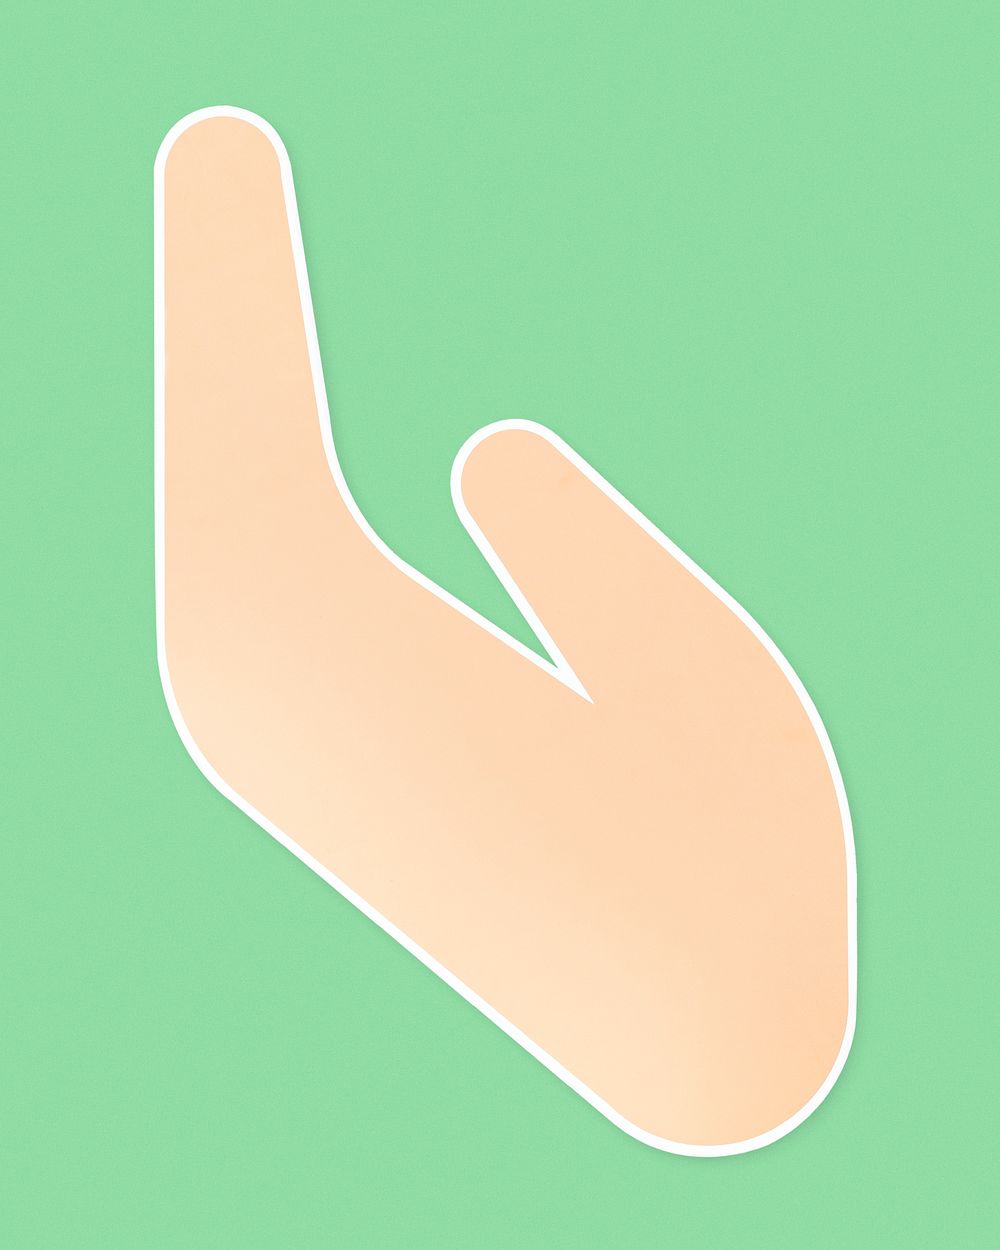 Giving alms hand gesture icon